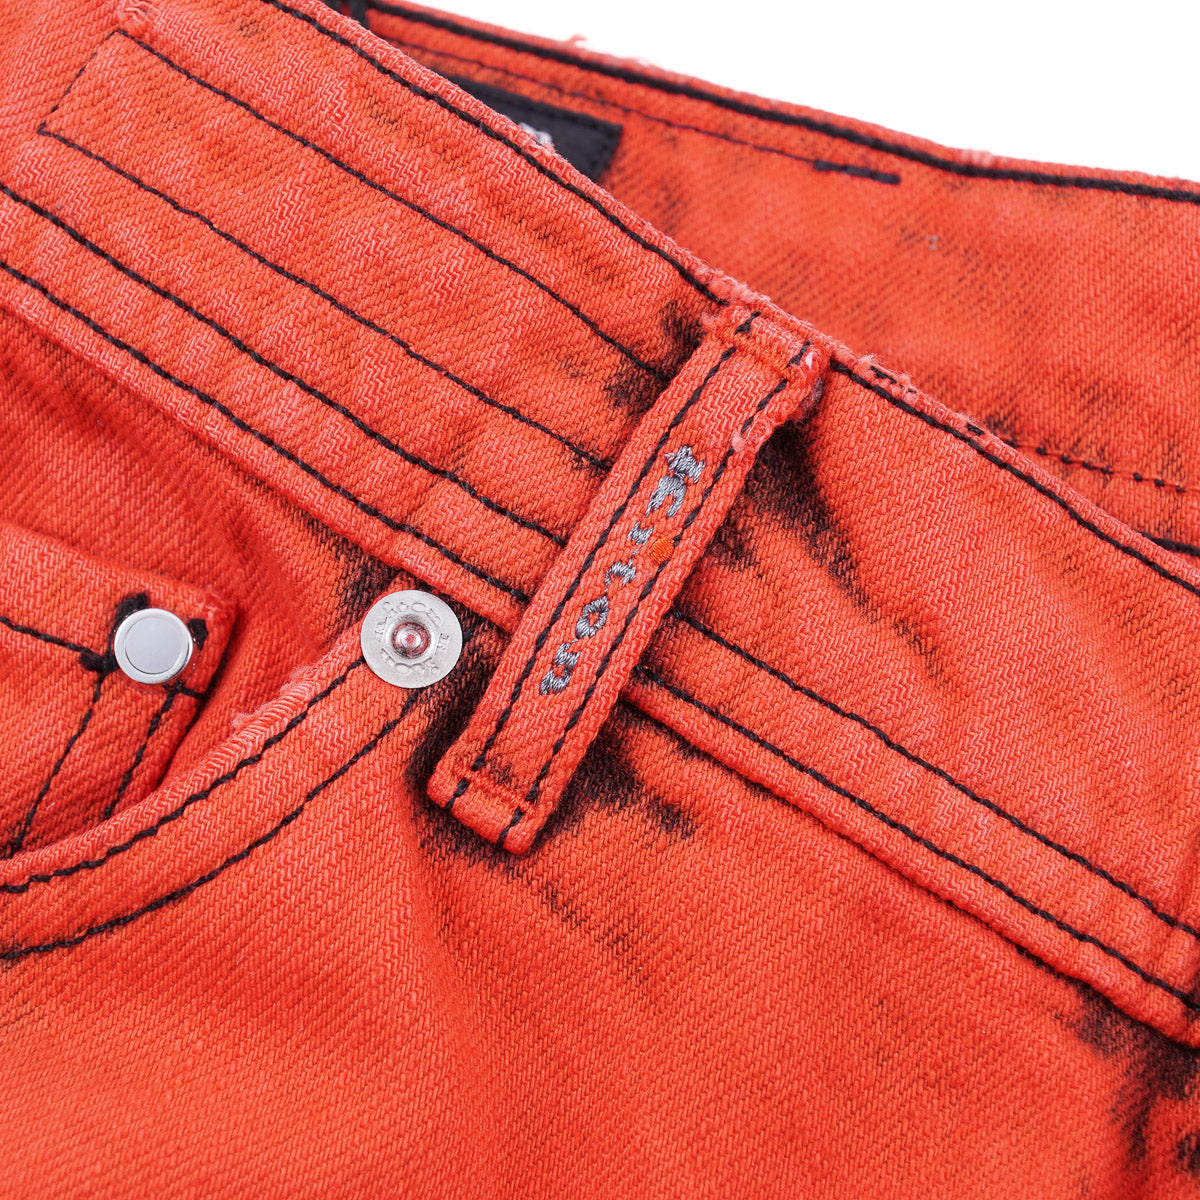 Kiton Special-Edition Overdyed Jeans - Top Shelf Apparel